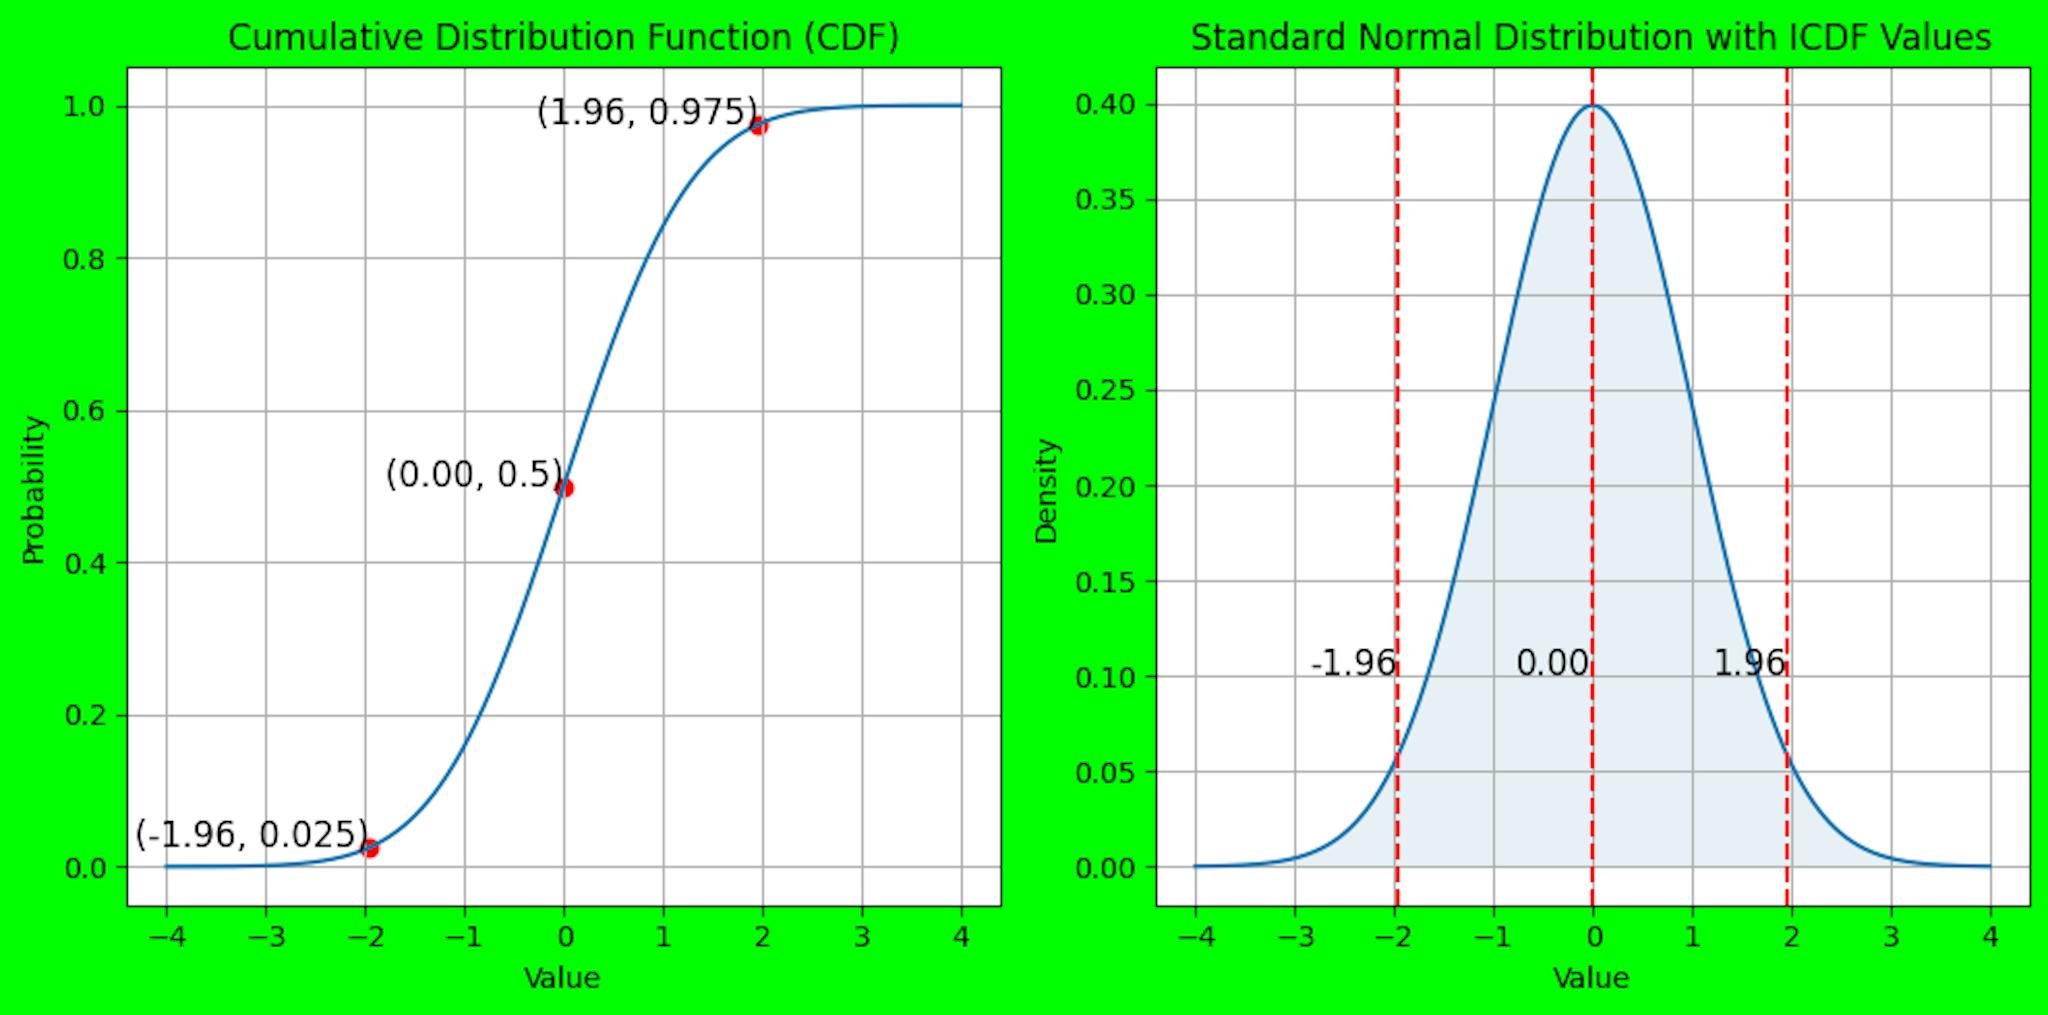 Visualization of CDF and values returned by ICDF given probabilities 0.025, 0.5, 0.975